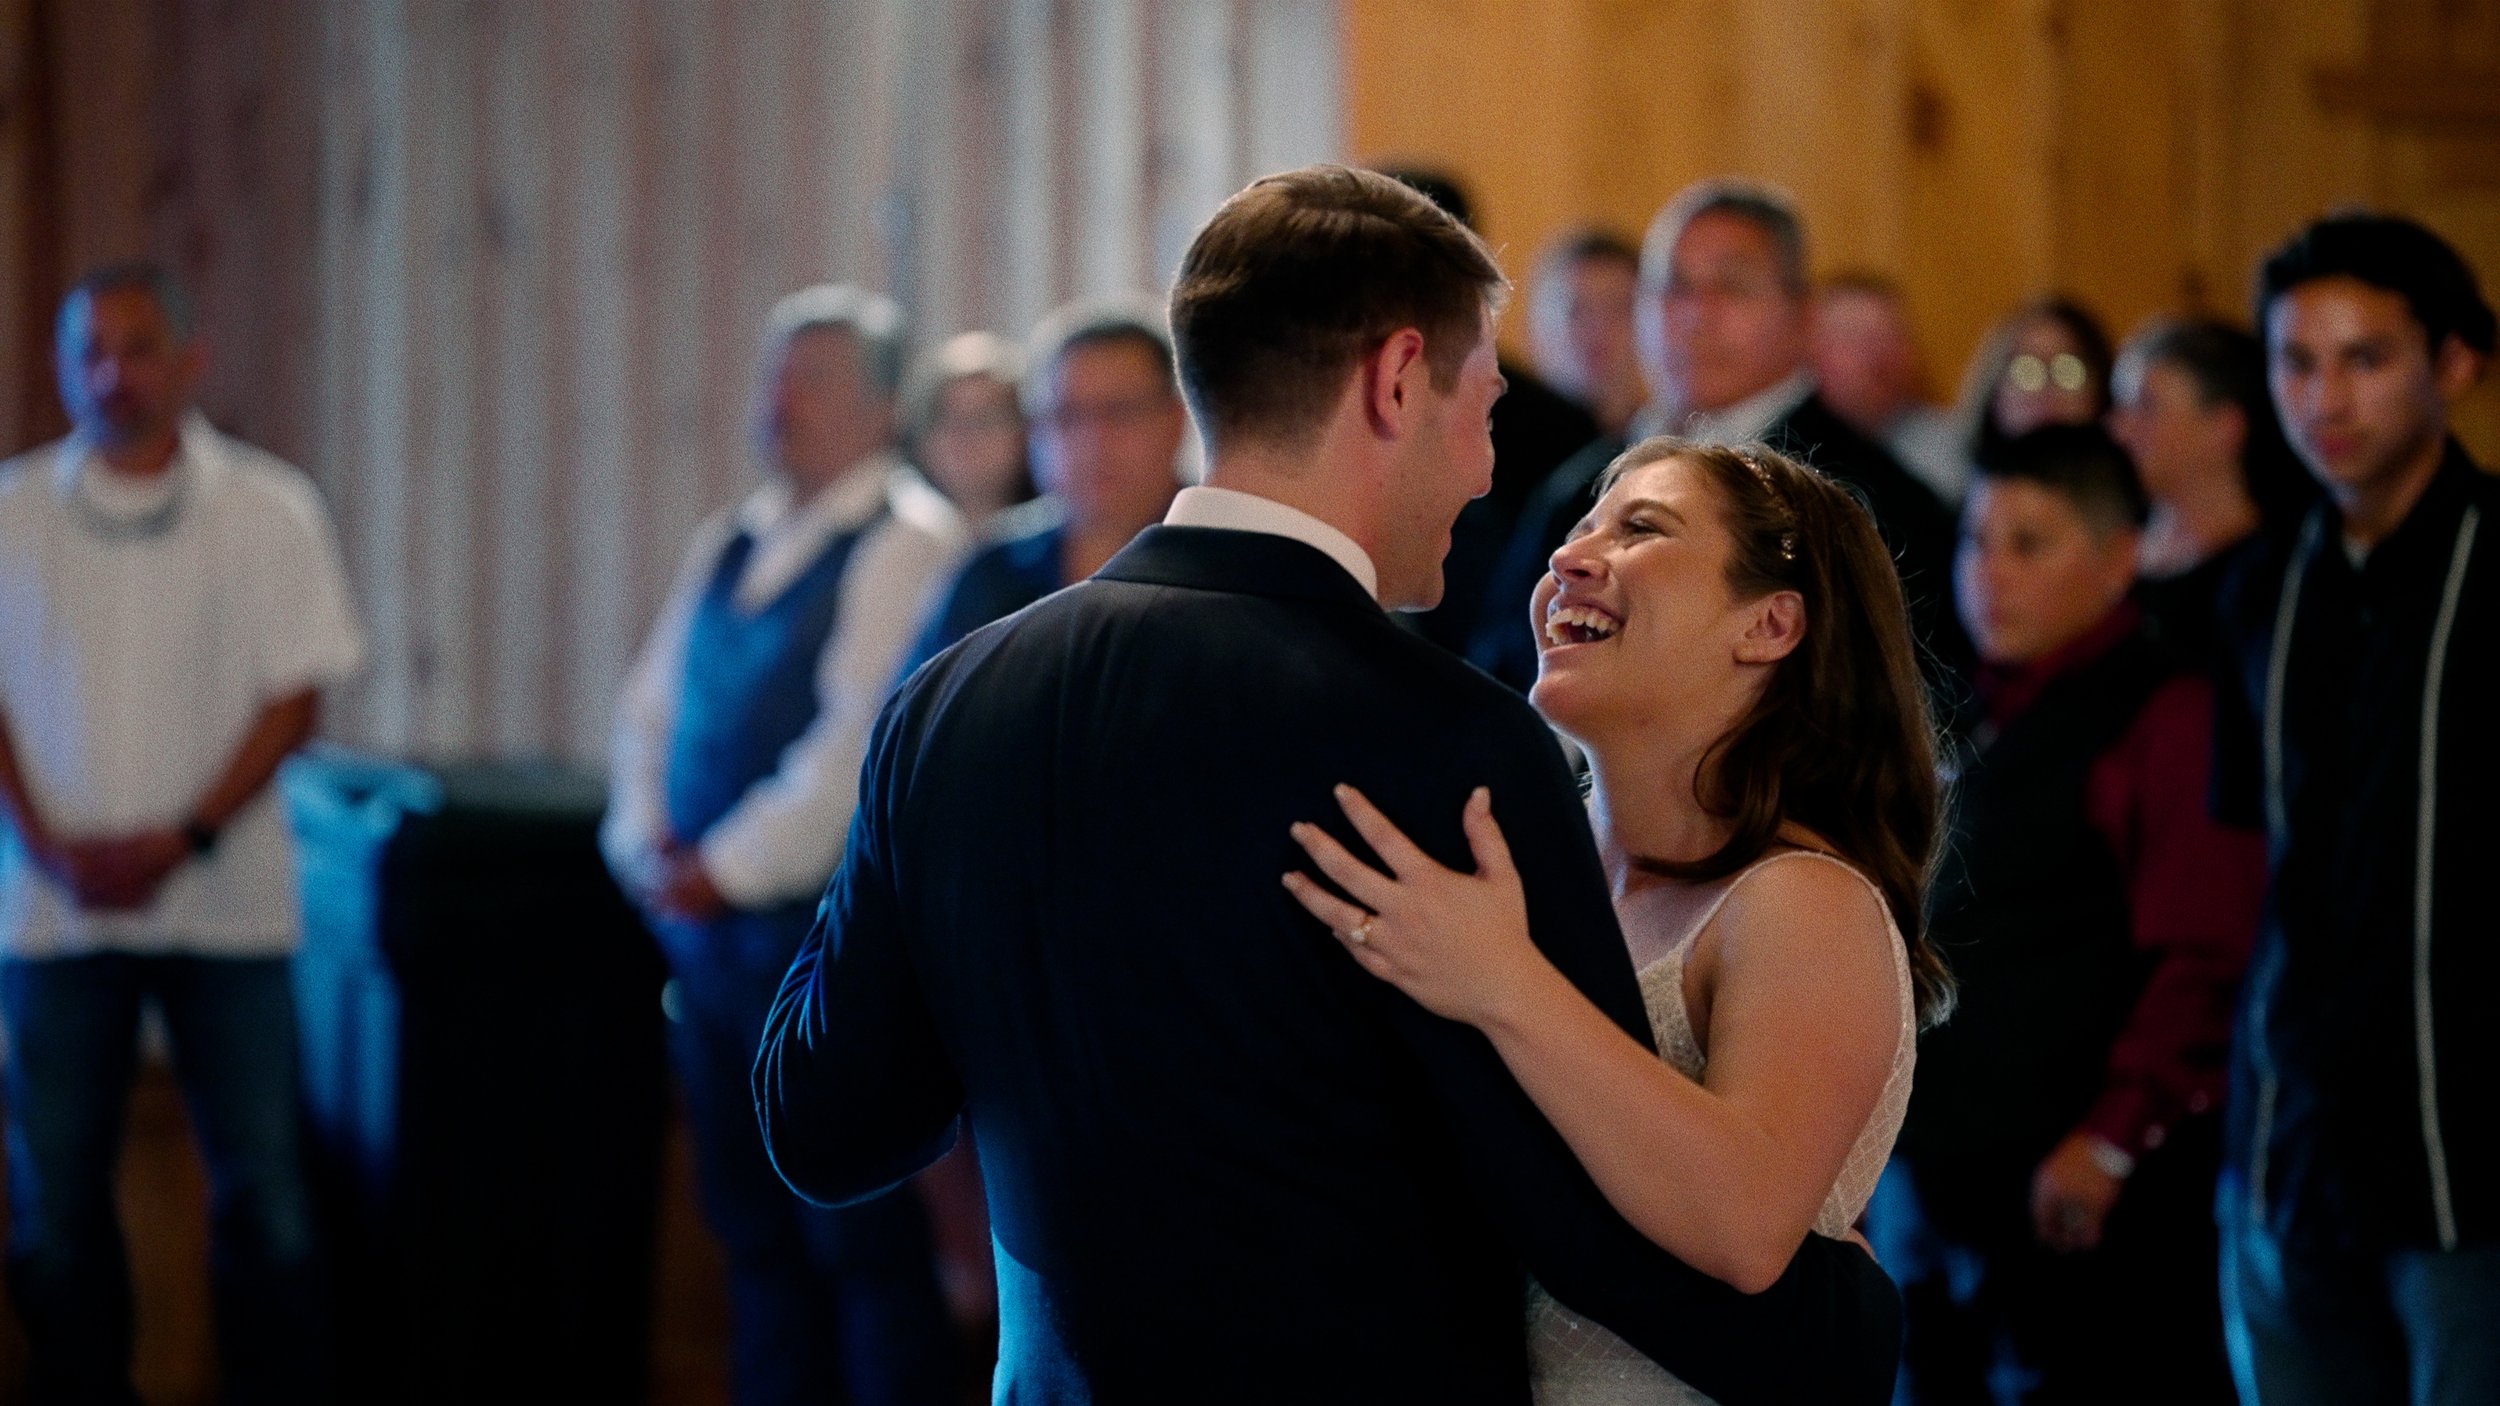 bride smiles at groom during first dance